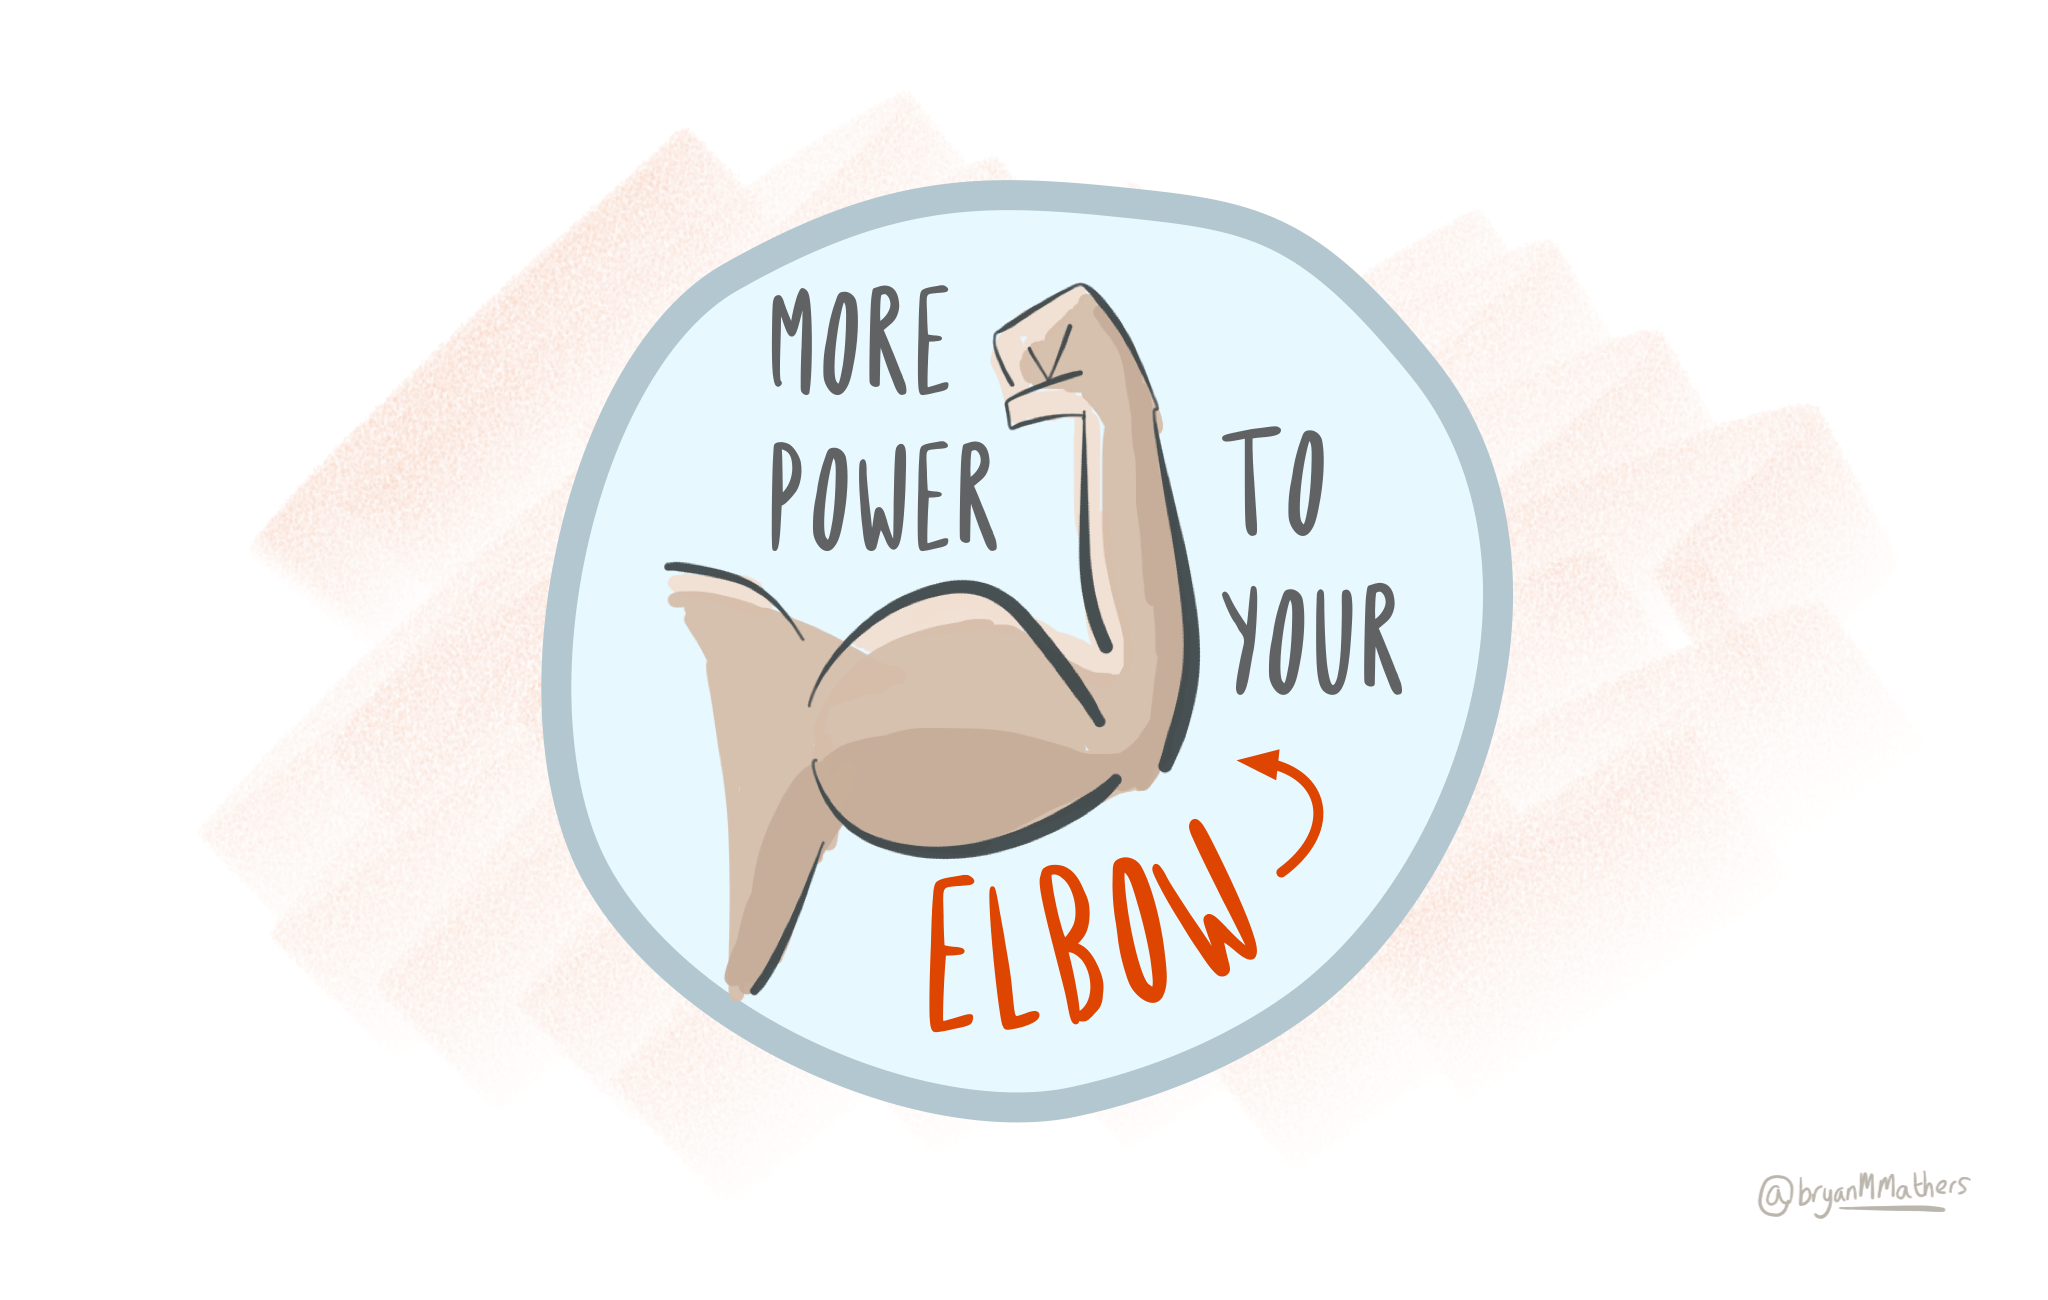 More power to your elbow